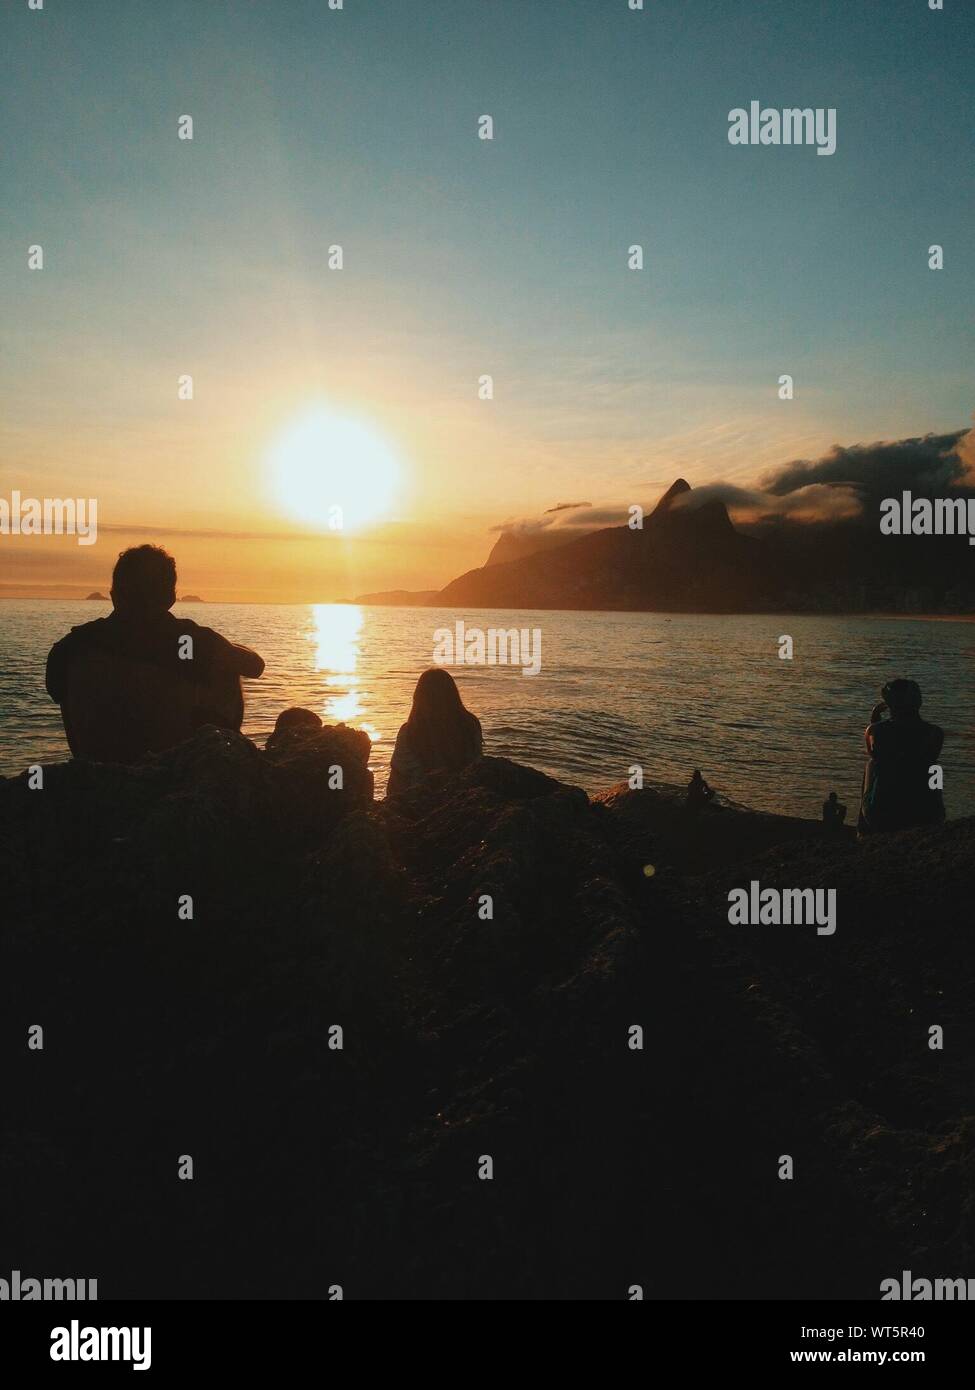 Silhouette People Relaxing At Arpoador Beach During Sunset Stock Photo